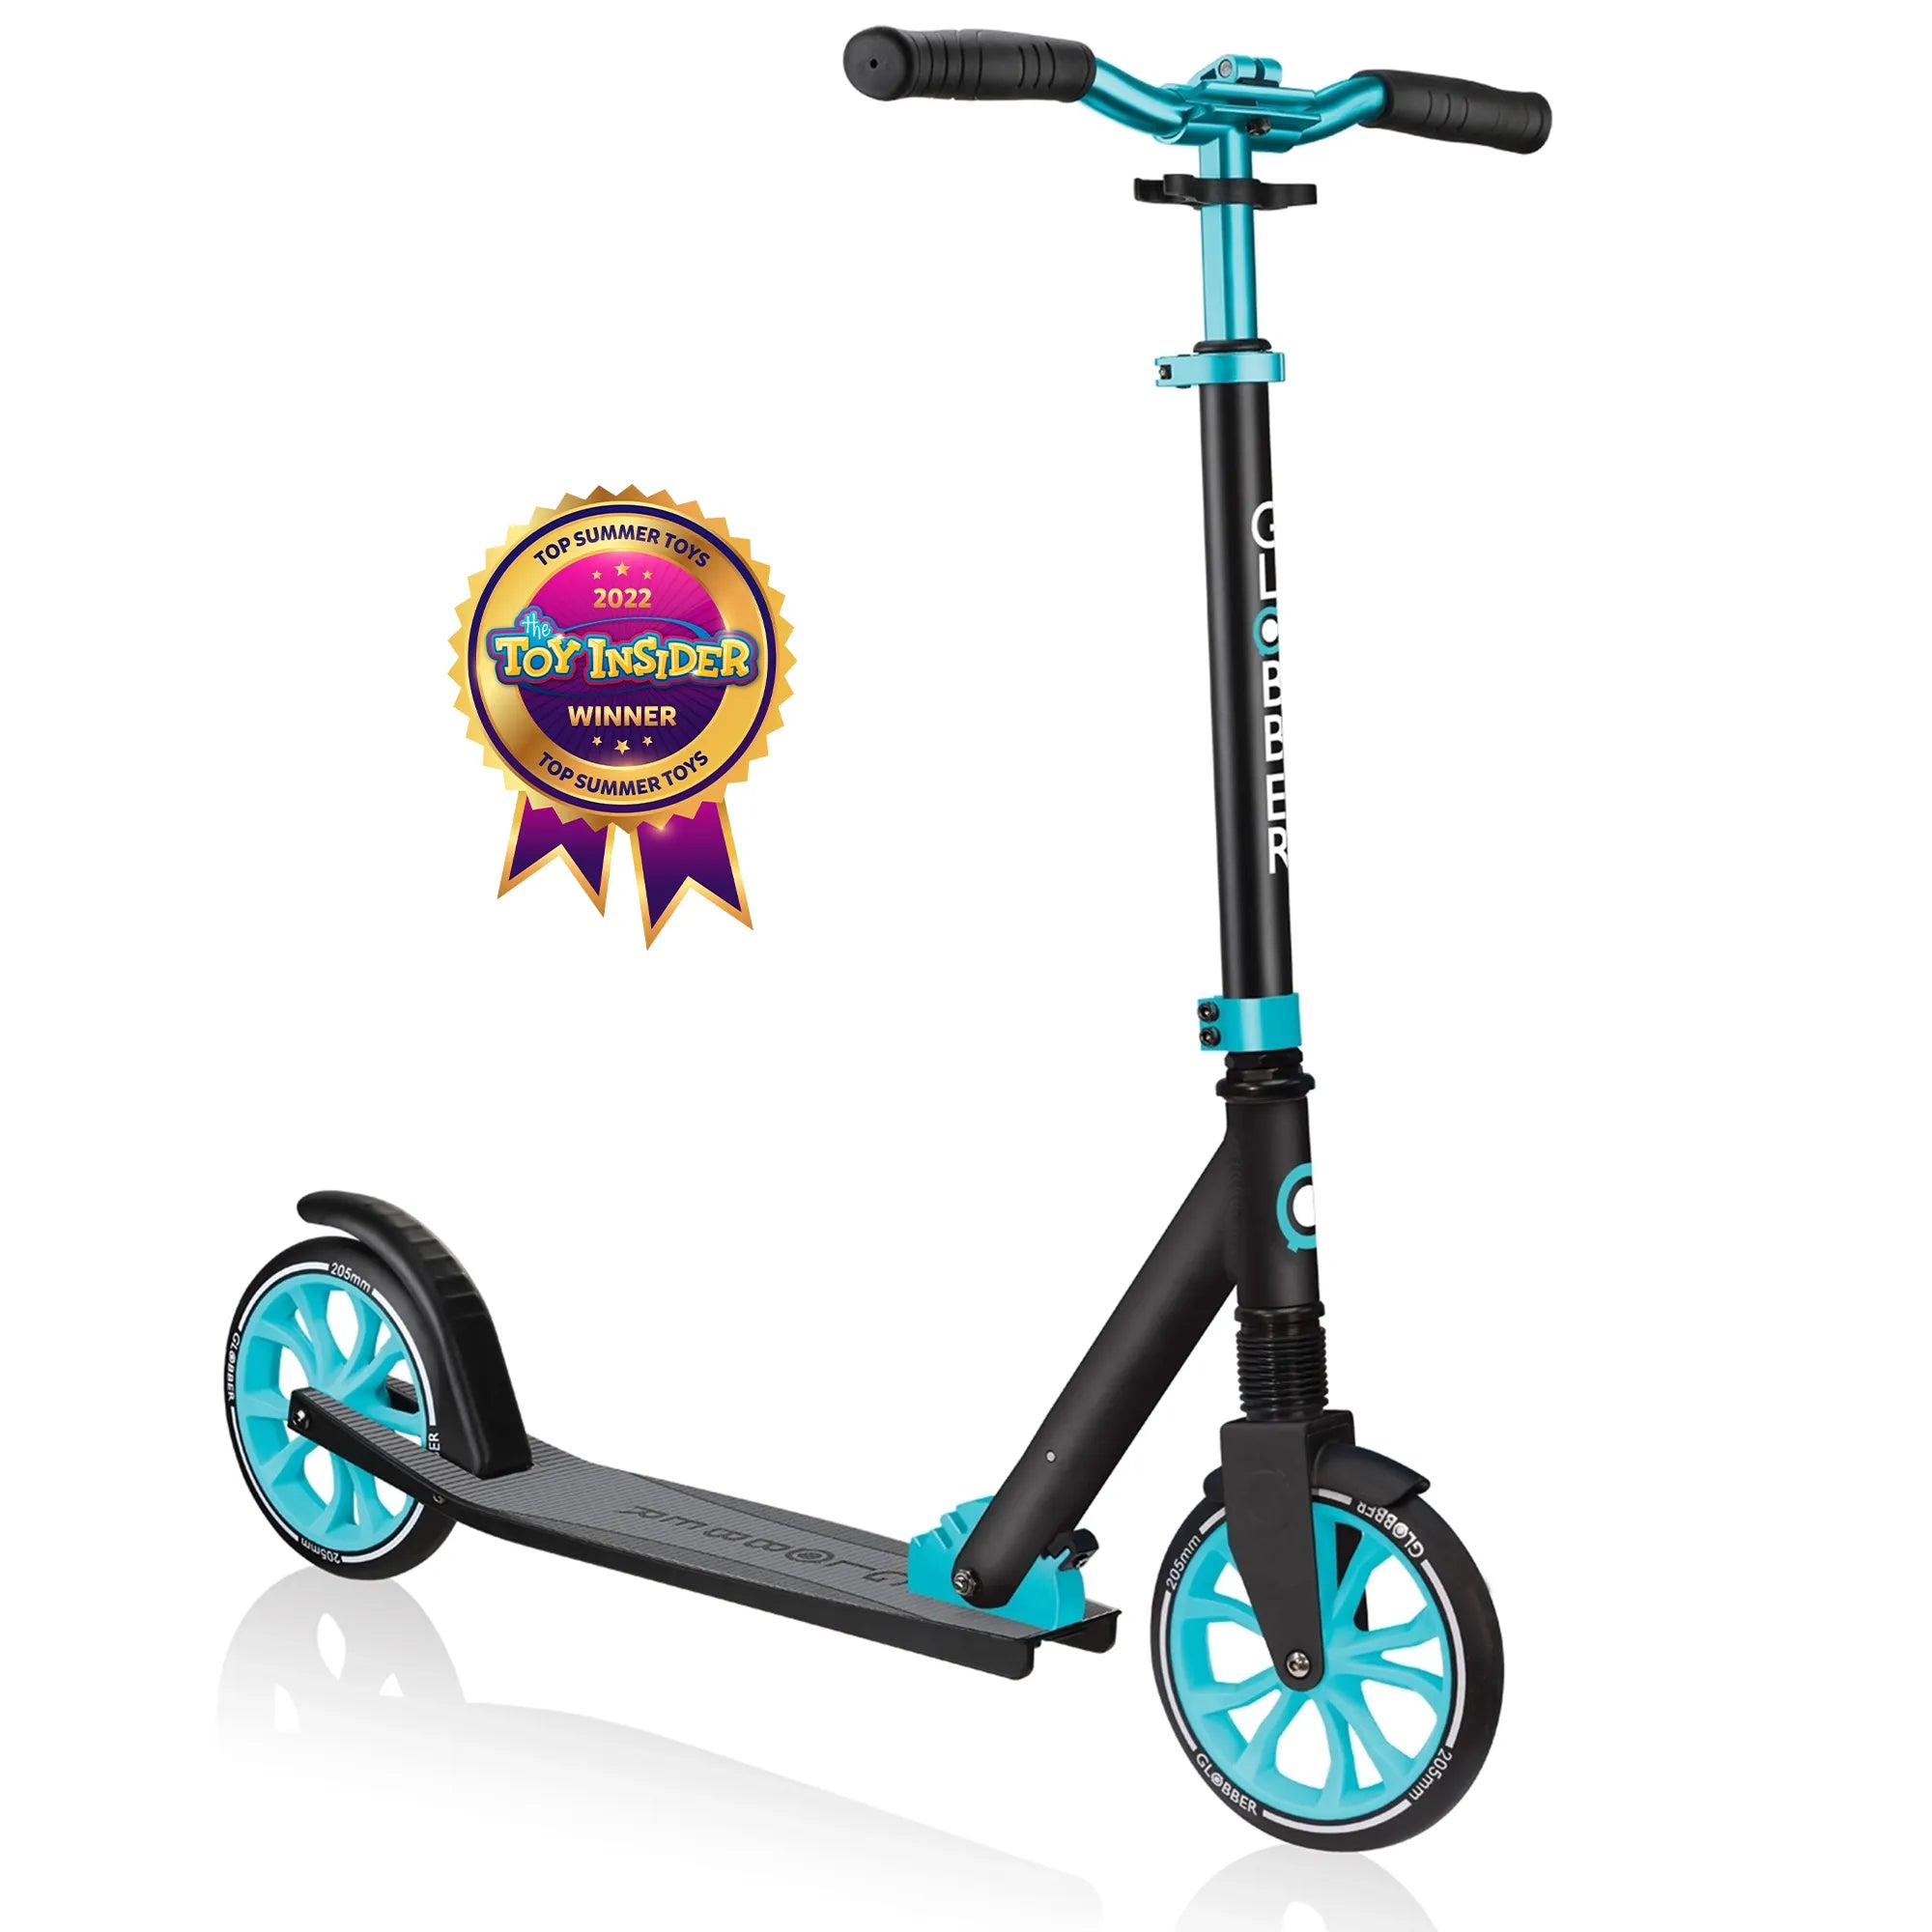 Globber NL 205 - Black & Teal - Award-Winning Scooter Ages 8-Adult - Brown's Hobby & Game